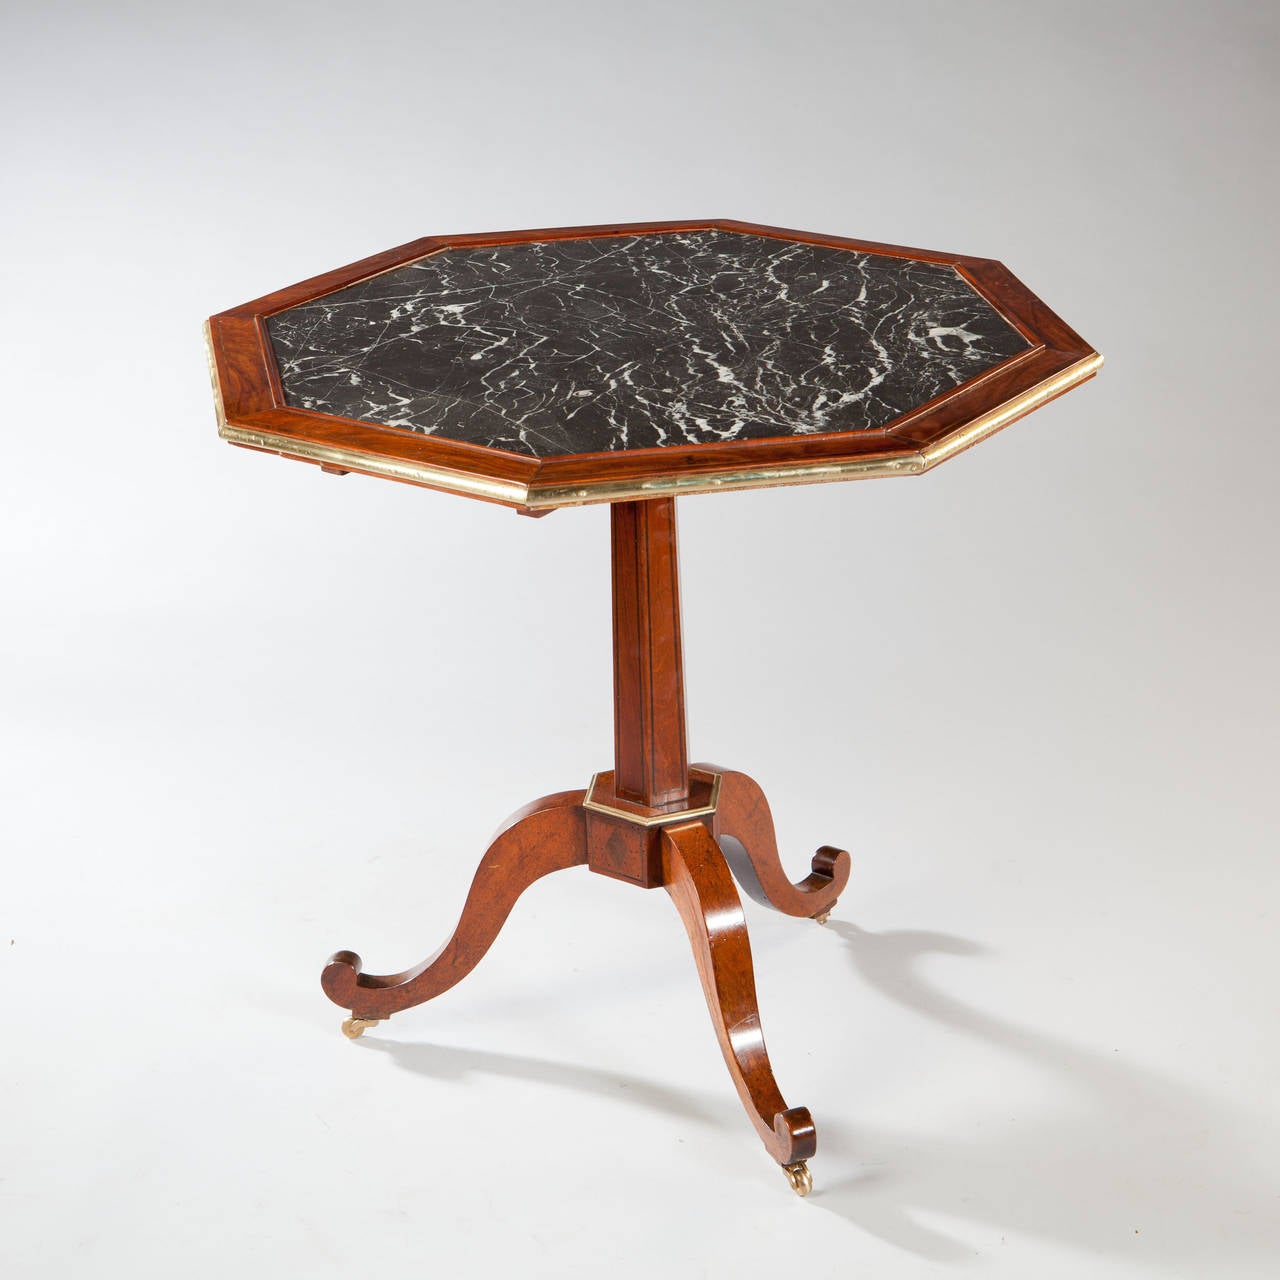 A fine late 18th century French tilt top table in the Georgian English manner. The octagonal top inset with a highly figured Nero Marquinia marble and bordered with cuban mahogany and polished brass borders. The tilt top supported on a hexagonal